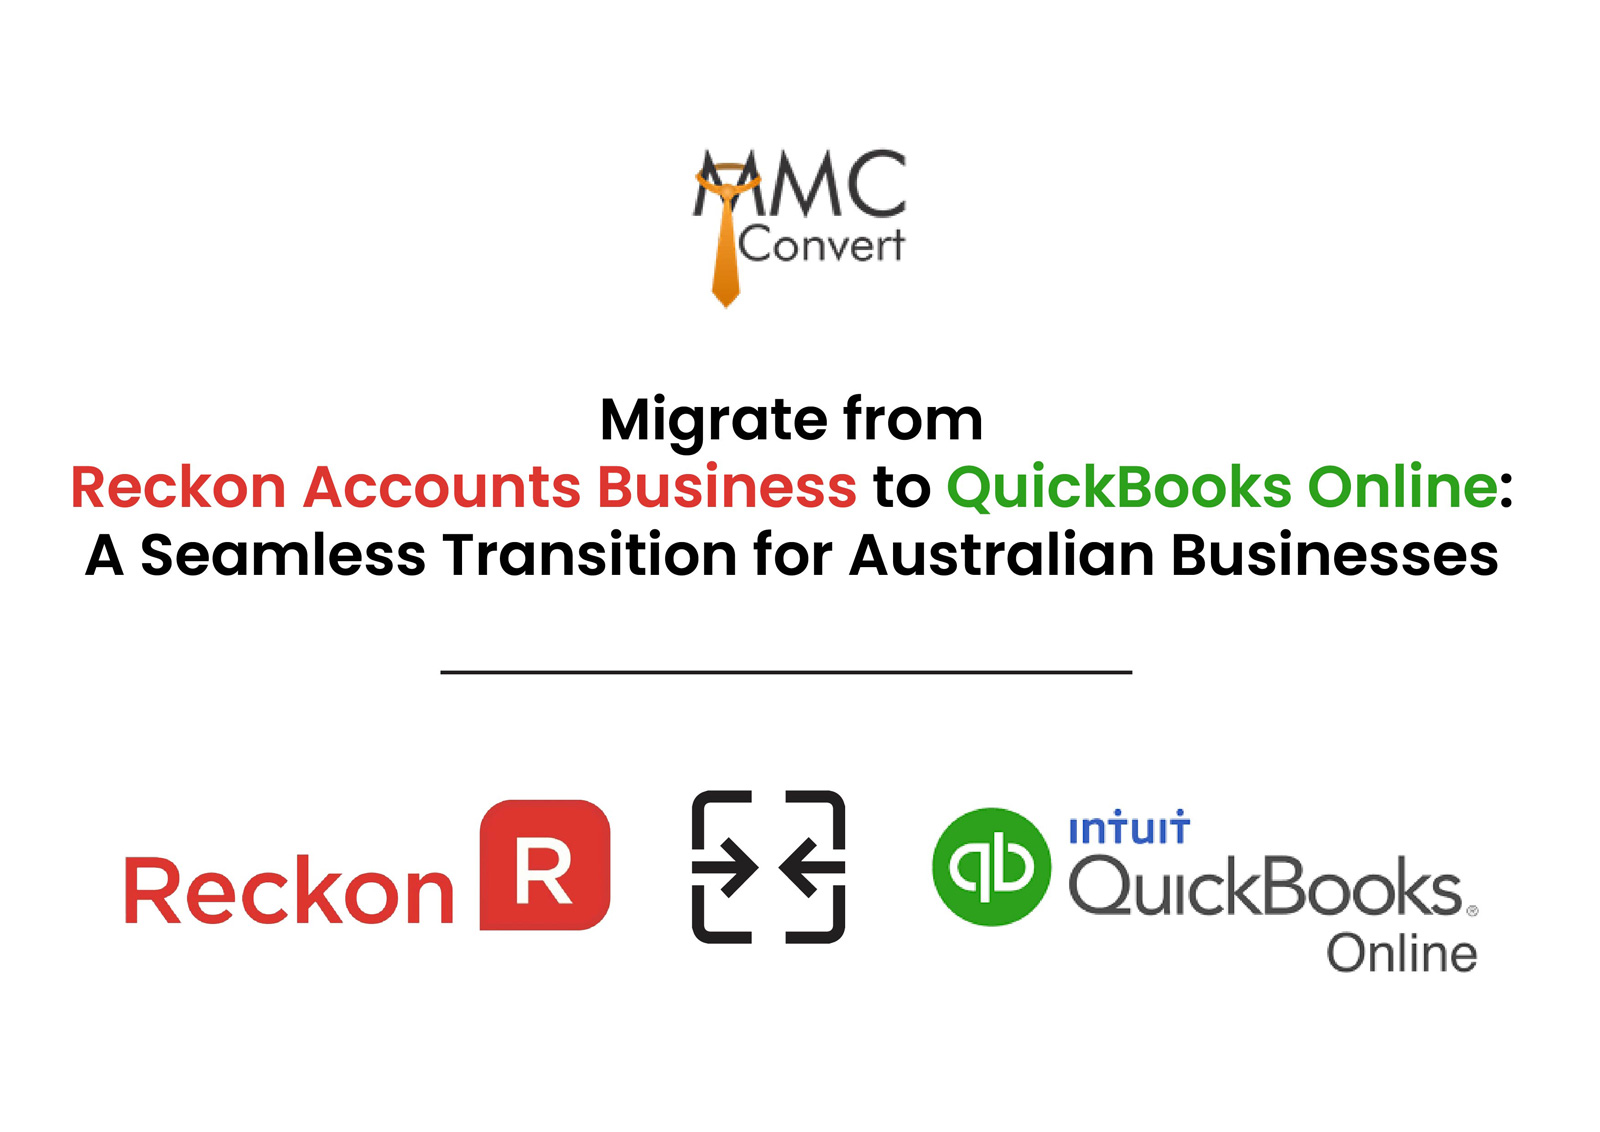 Migrate from Reckon Accounts Business to QuickBooks Online: A Seamless Transition for Australian Businesses